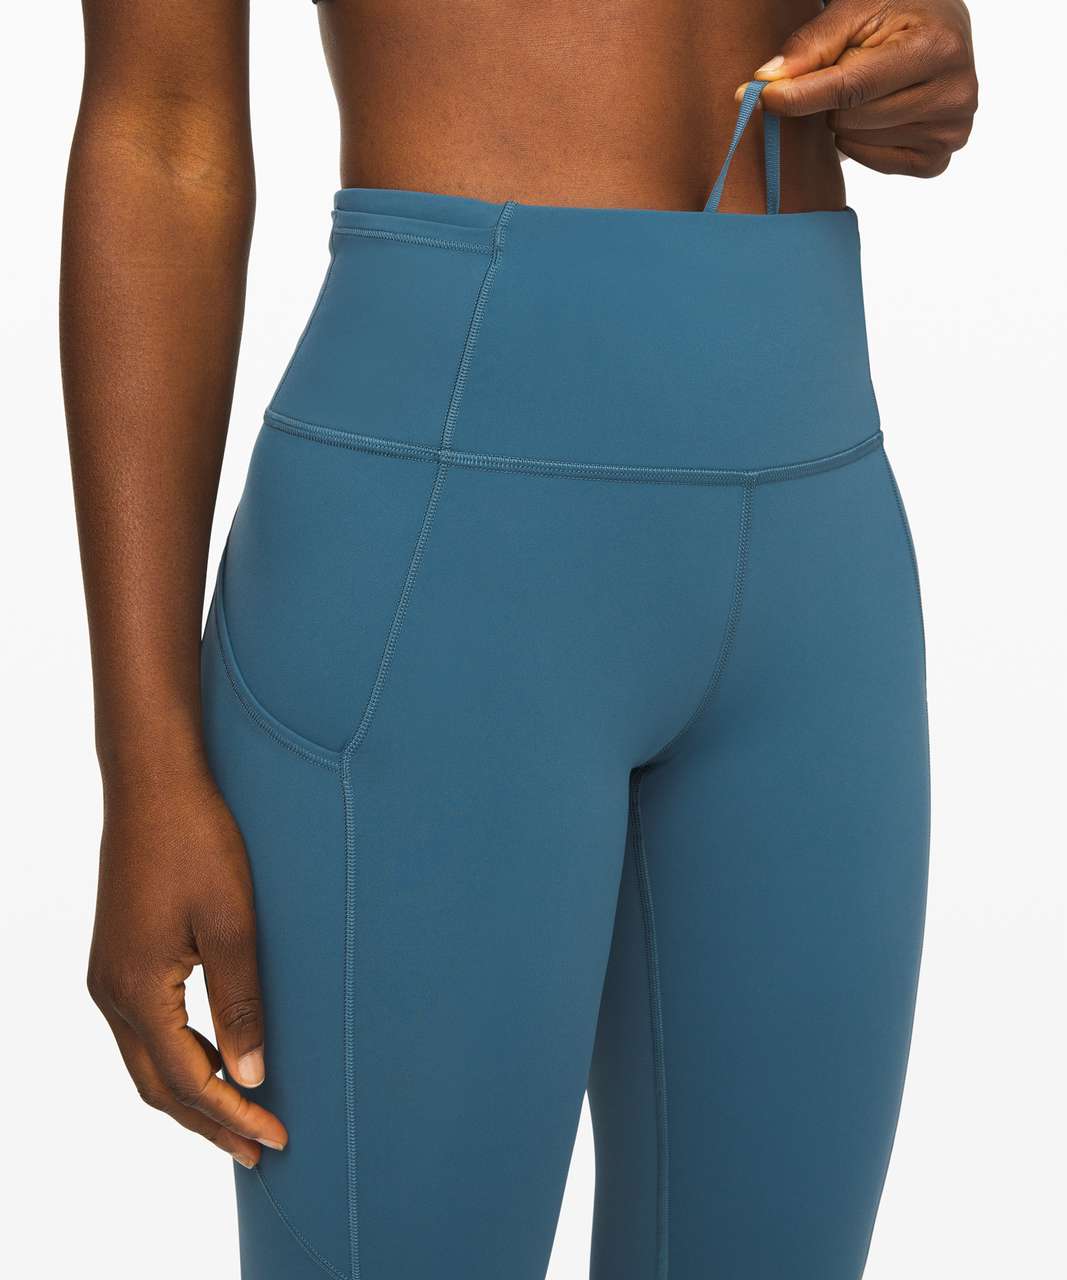 Lululemon Fast and Free High-Rise Tight 28" *Non-Reflective Suede - Petrol Blue